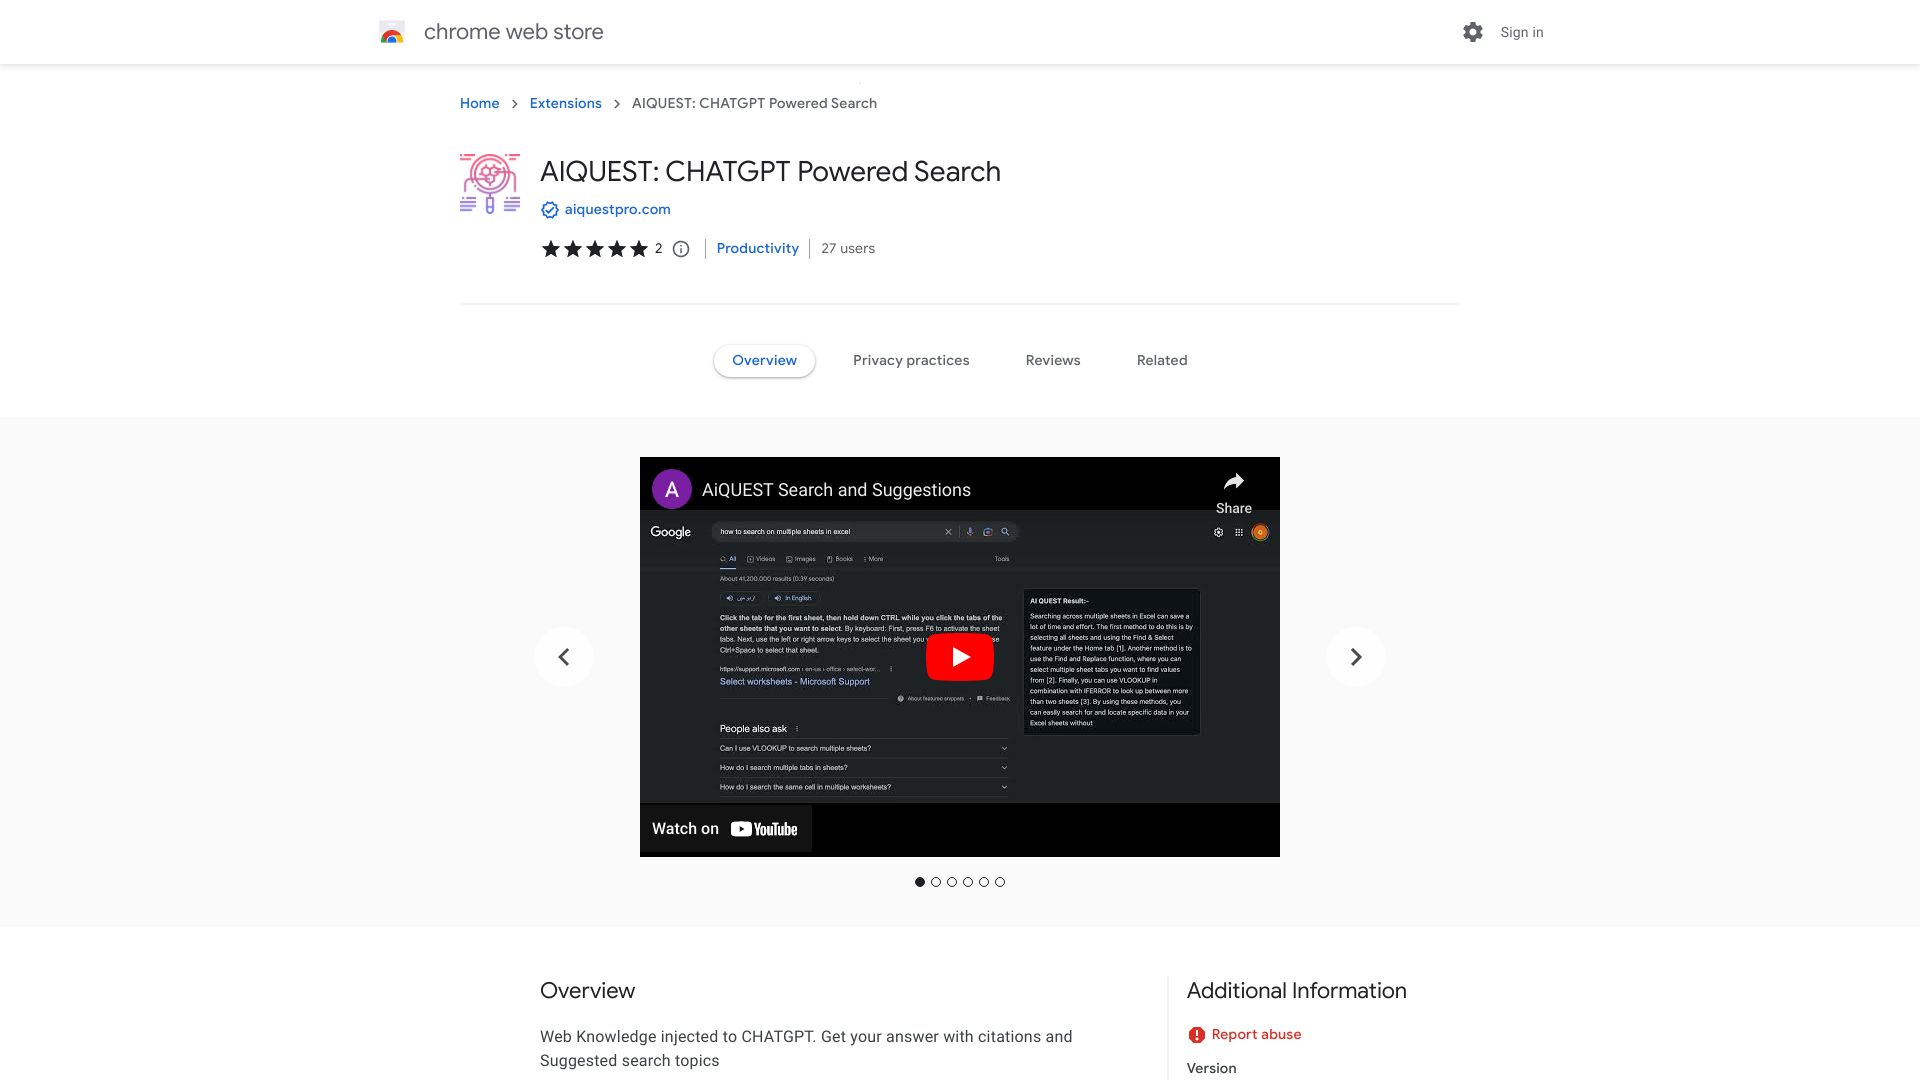 AIQUEST: CHATGPT Powered Search